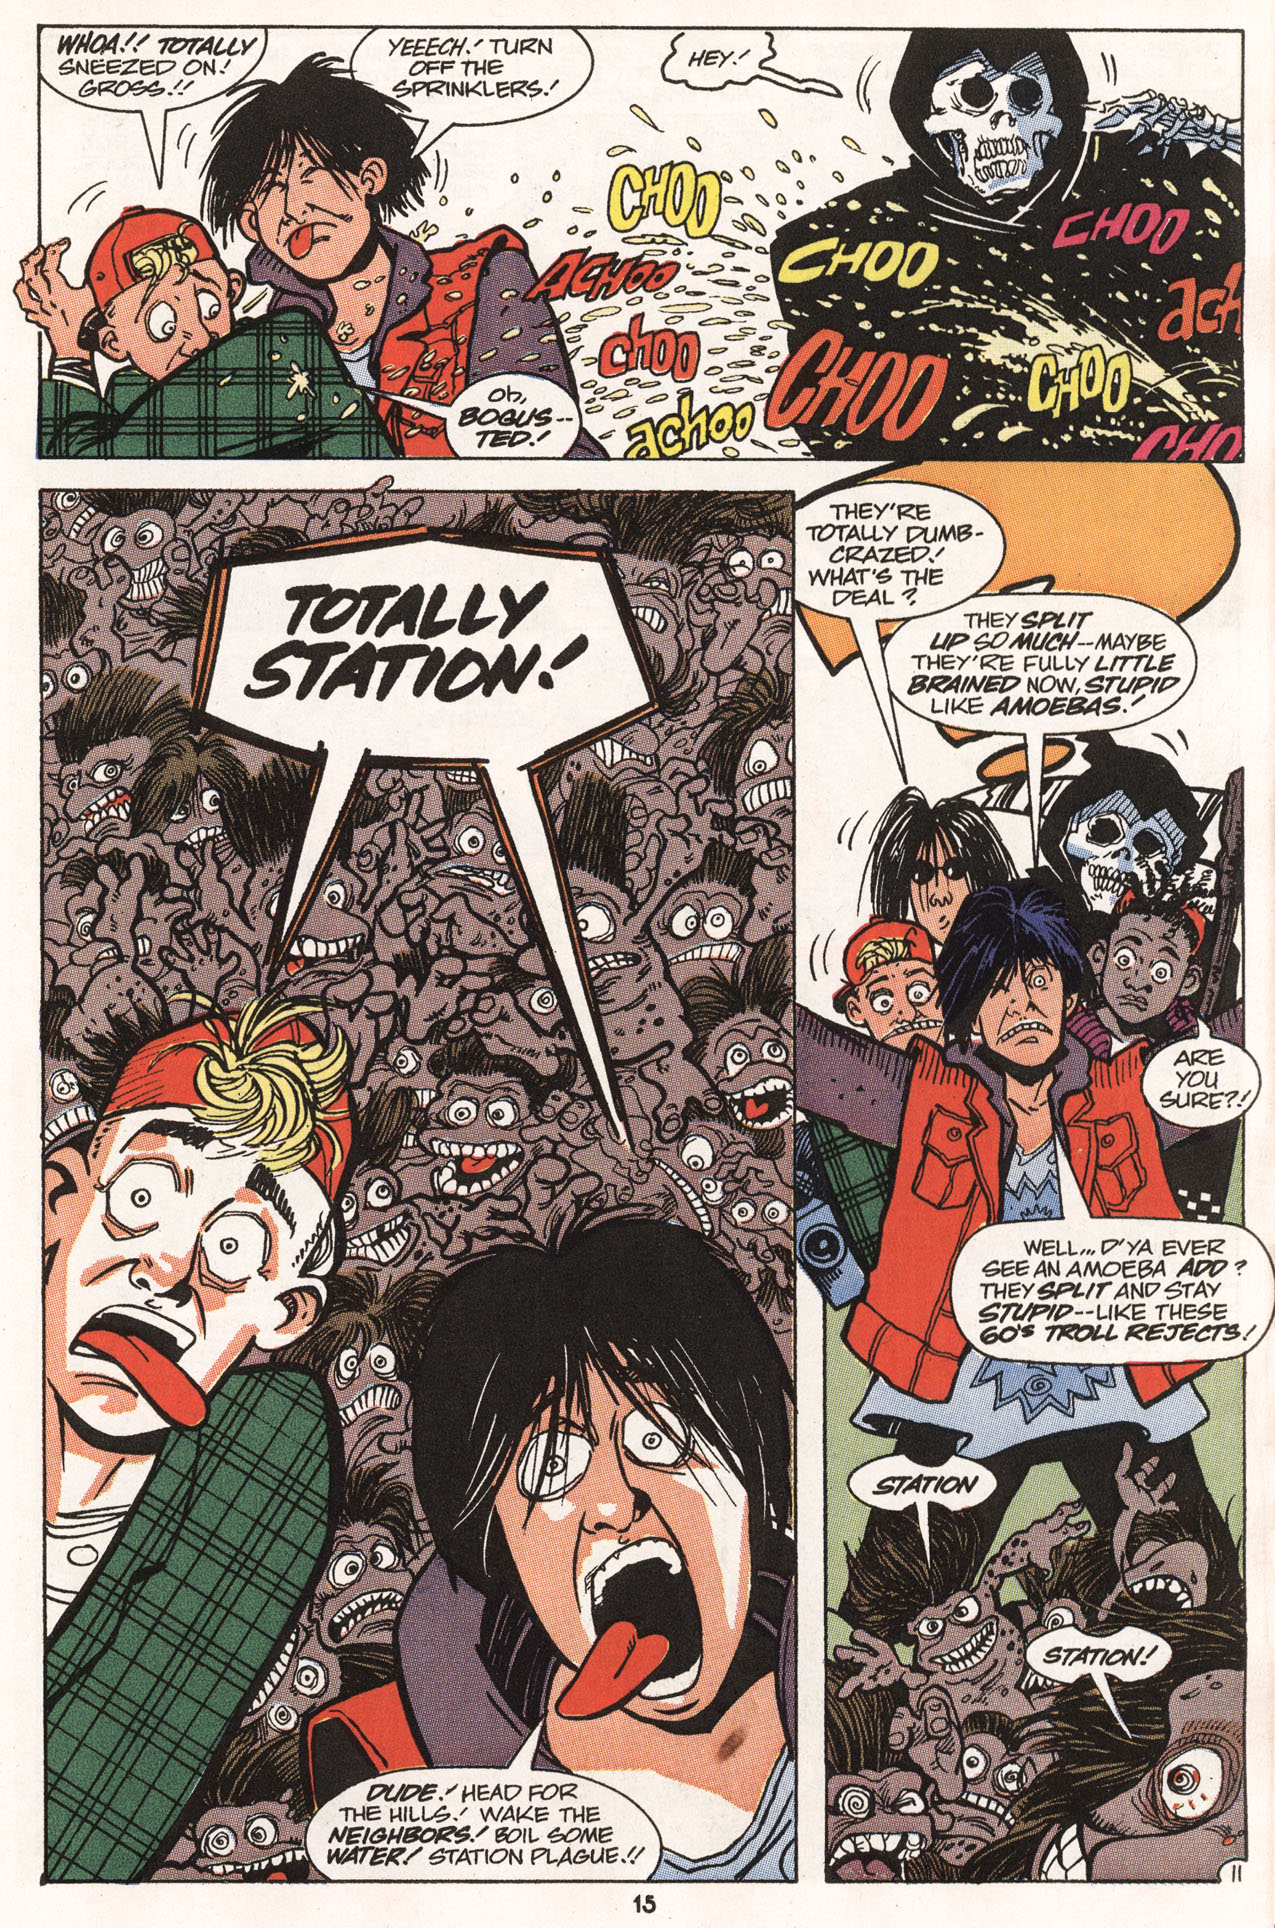 Read online Bill & Ted's Excellent Comic Book comic -  Issue #4 - 16